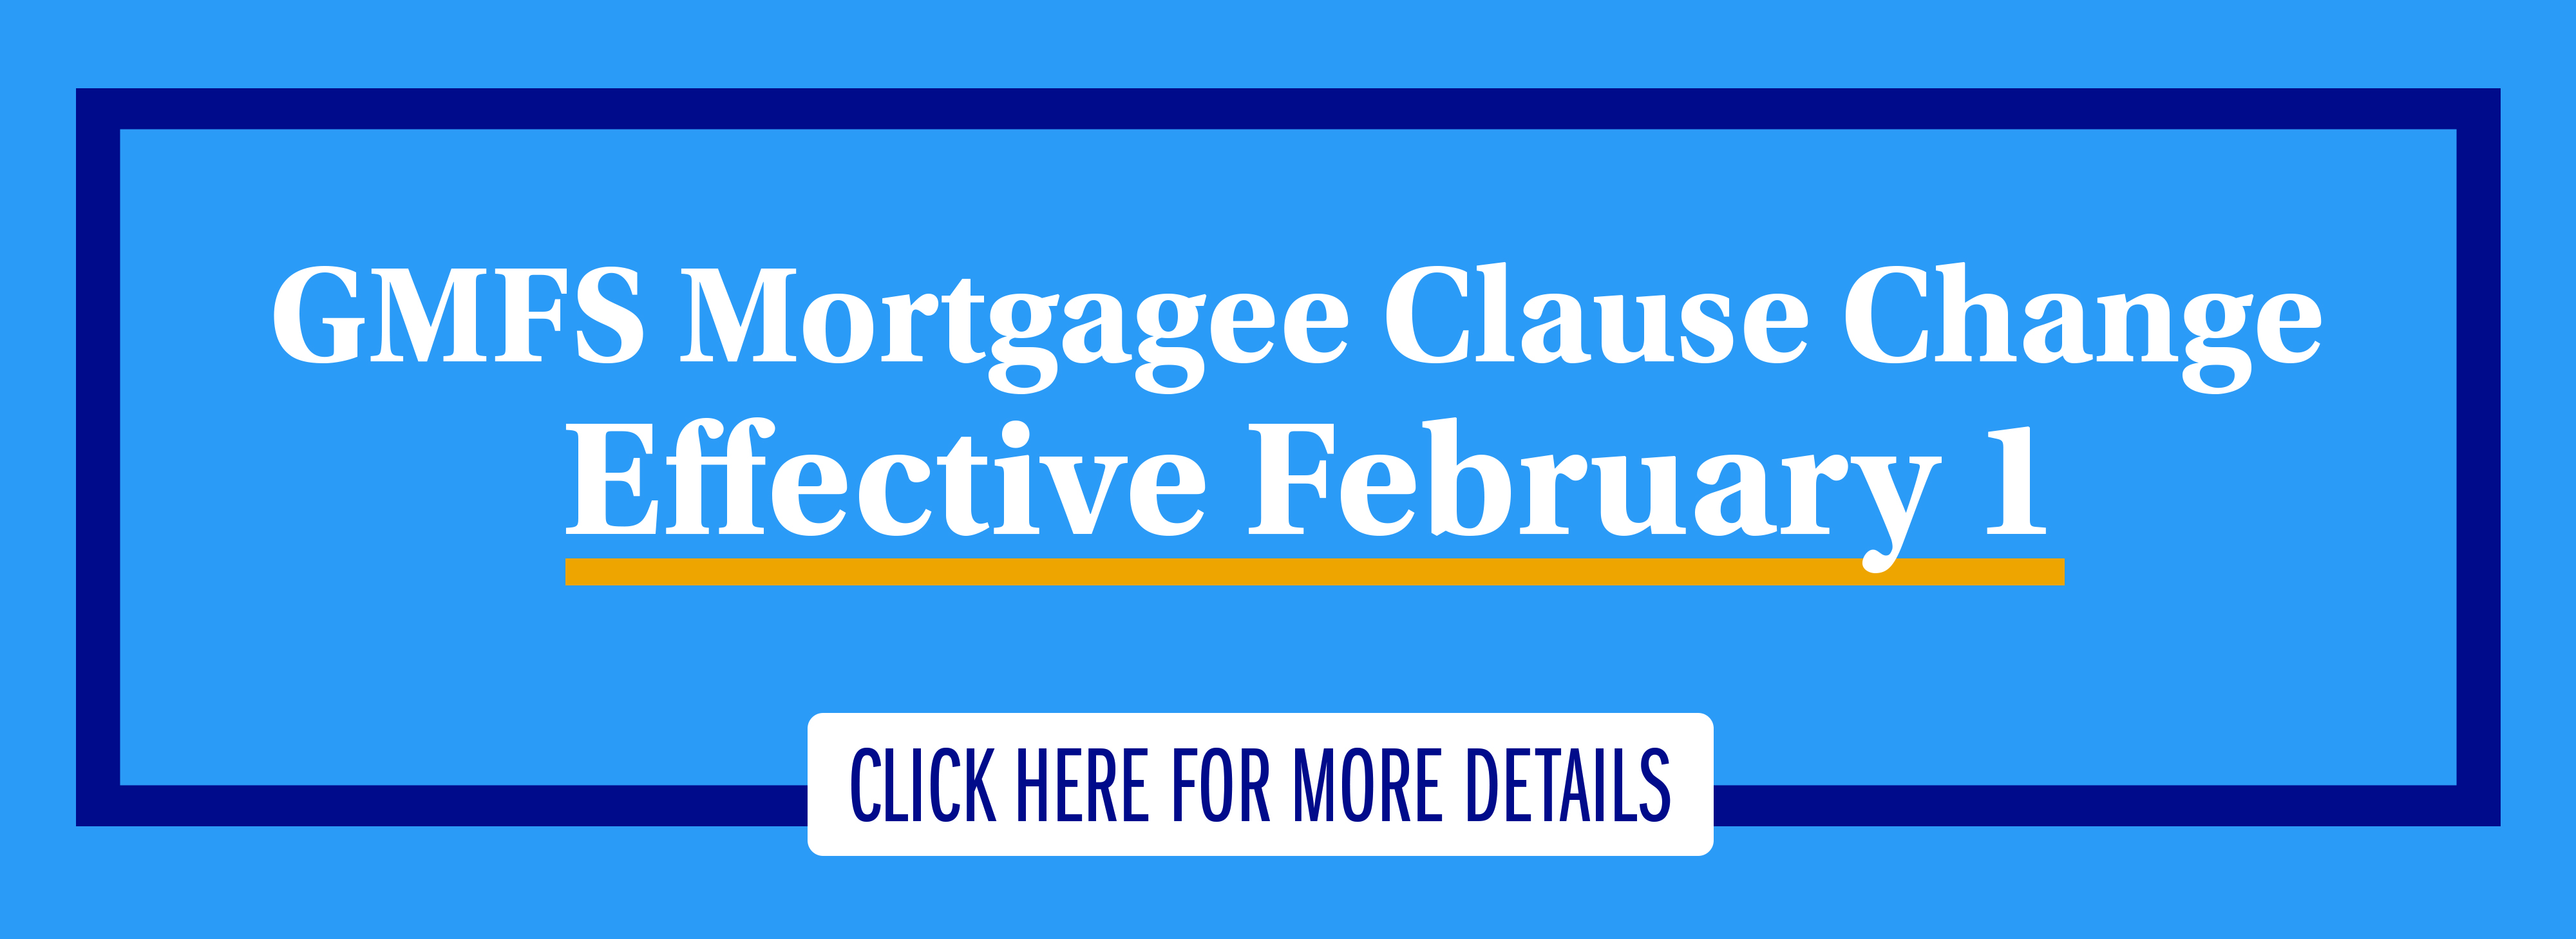 GMFS Mortgagee Clause Change